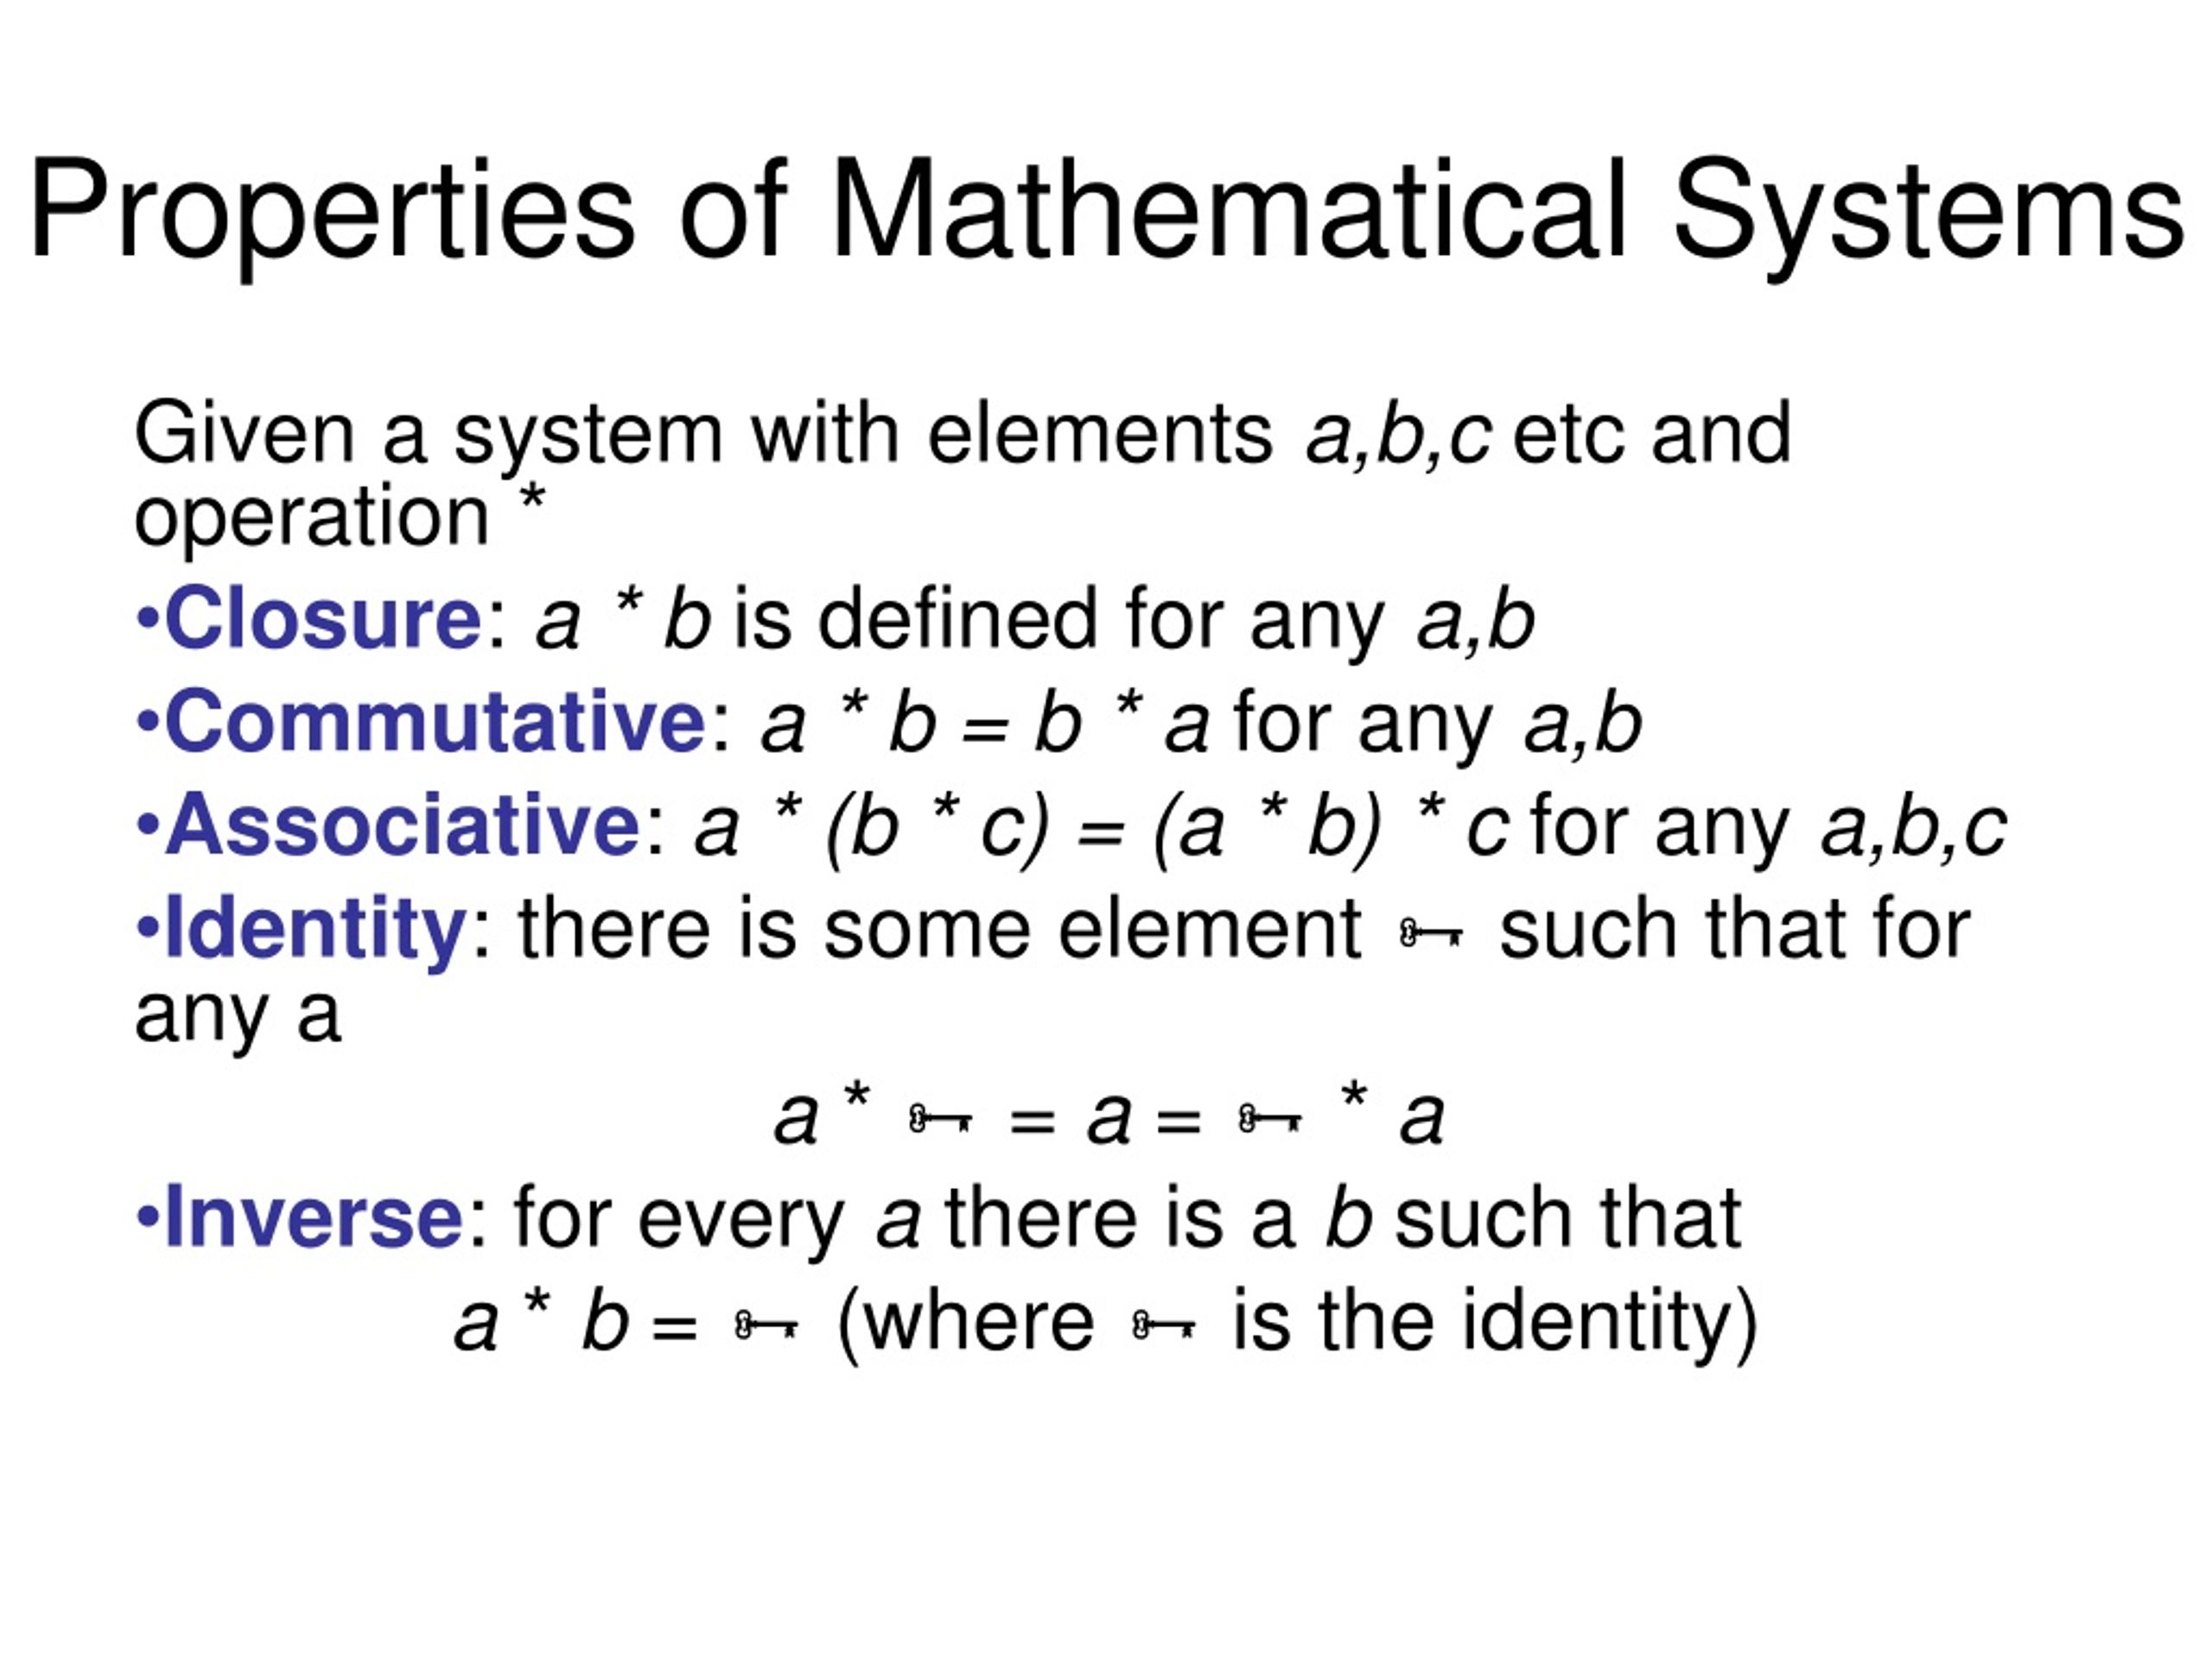 research about mathematical system